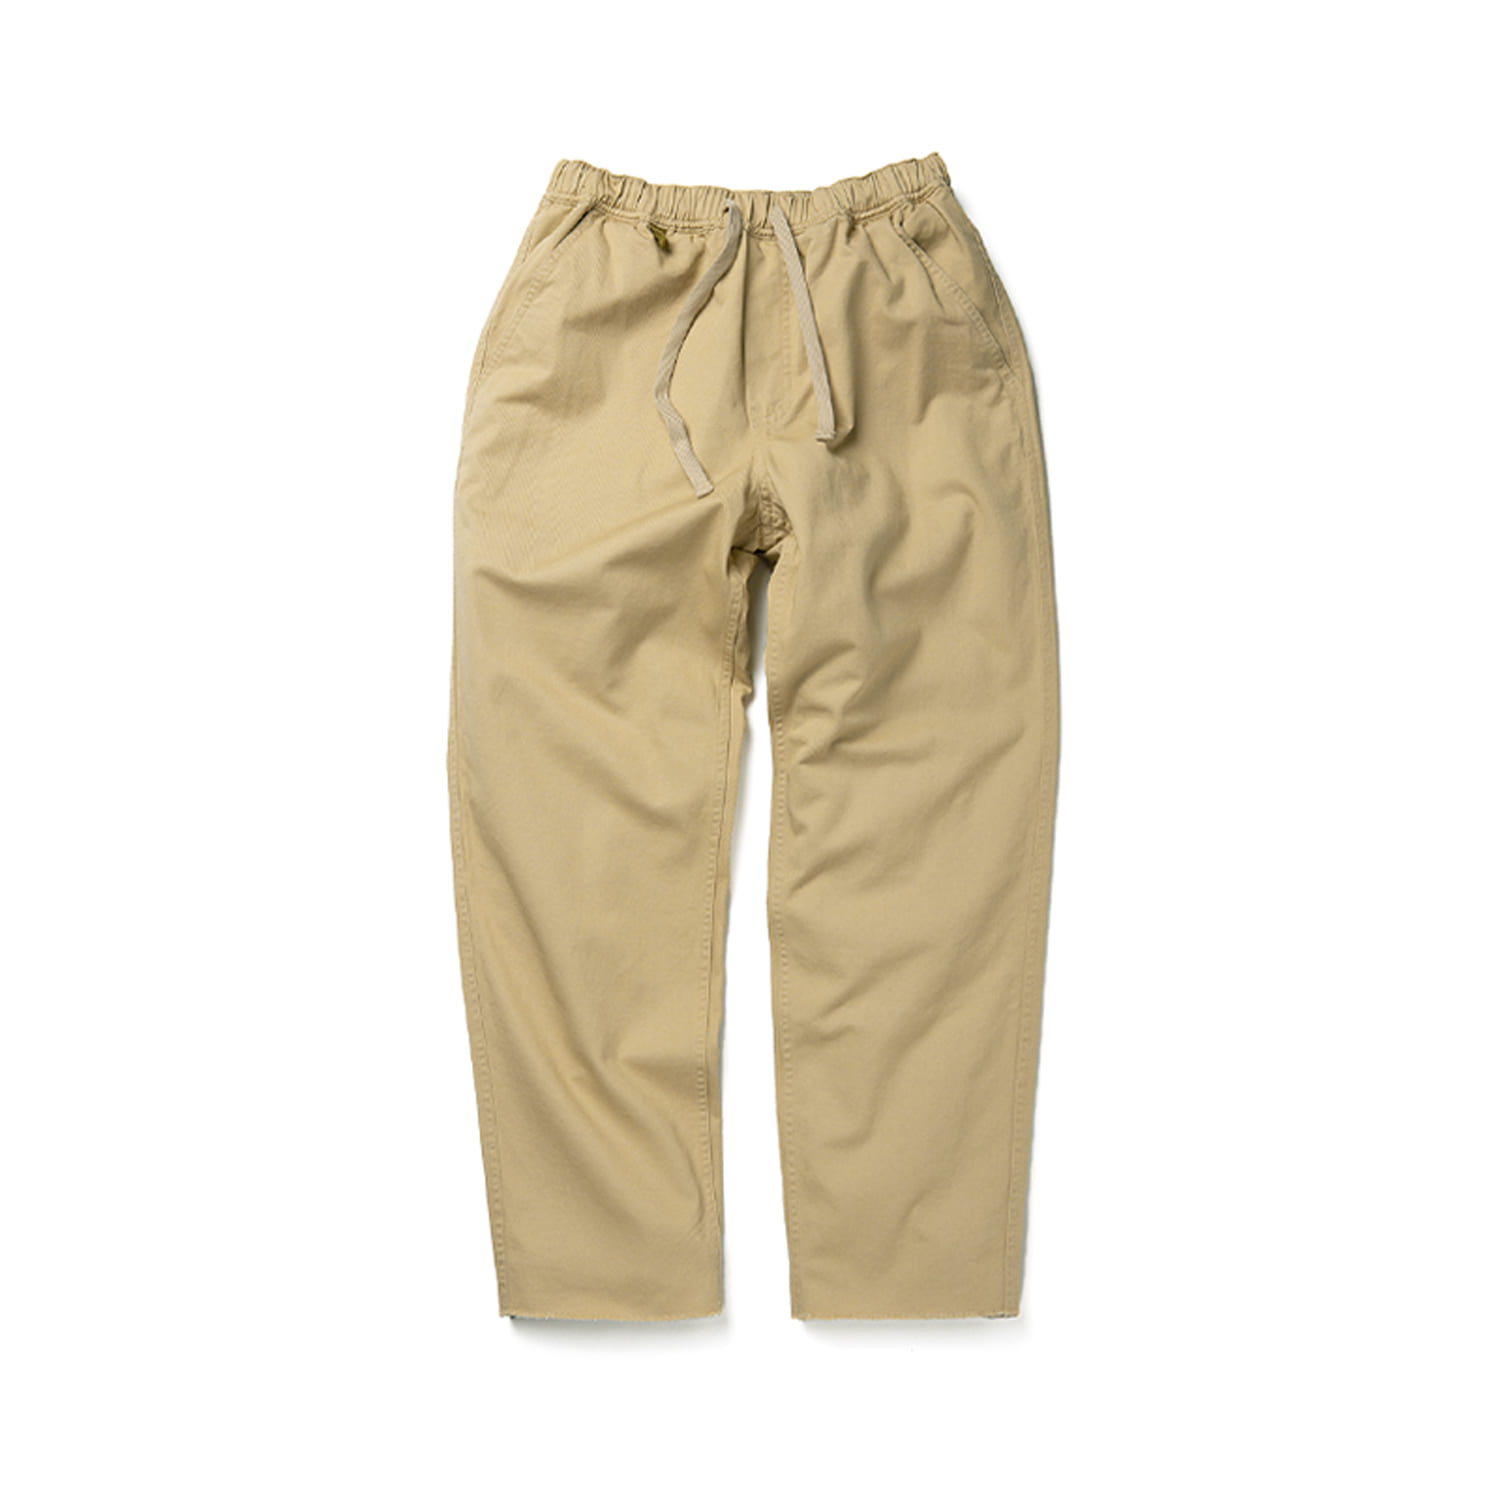 Washed Self-Edge Work Pants &quot;SAND&quot;SEASON OFF